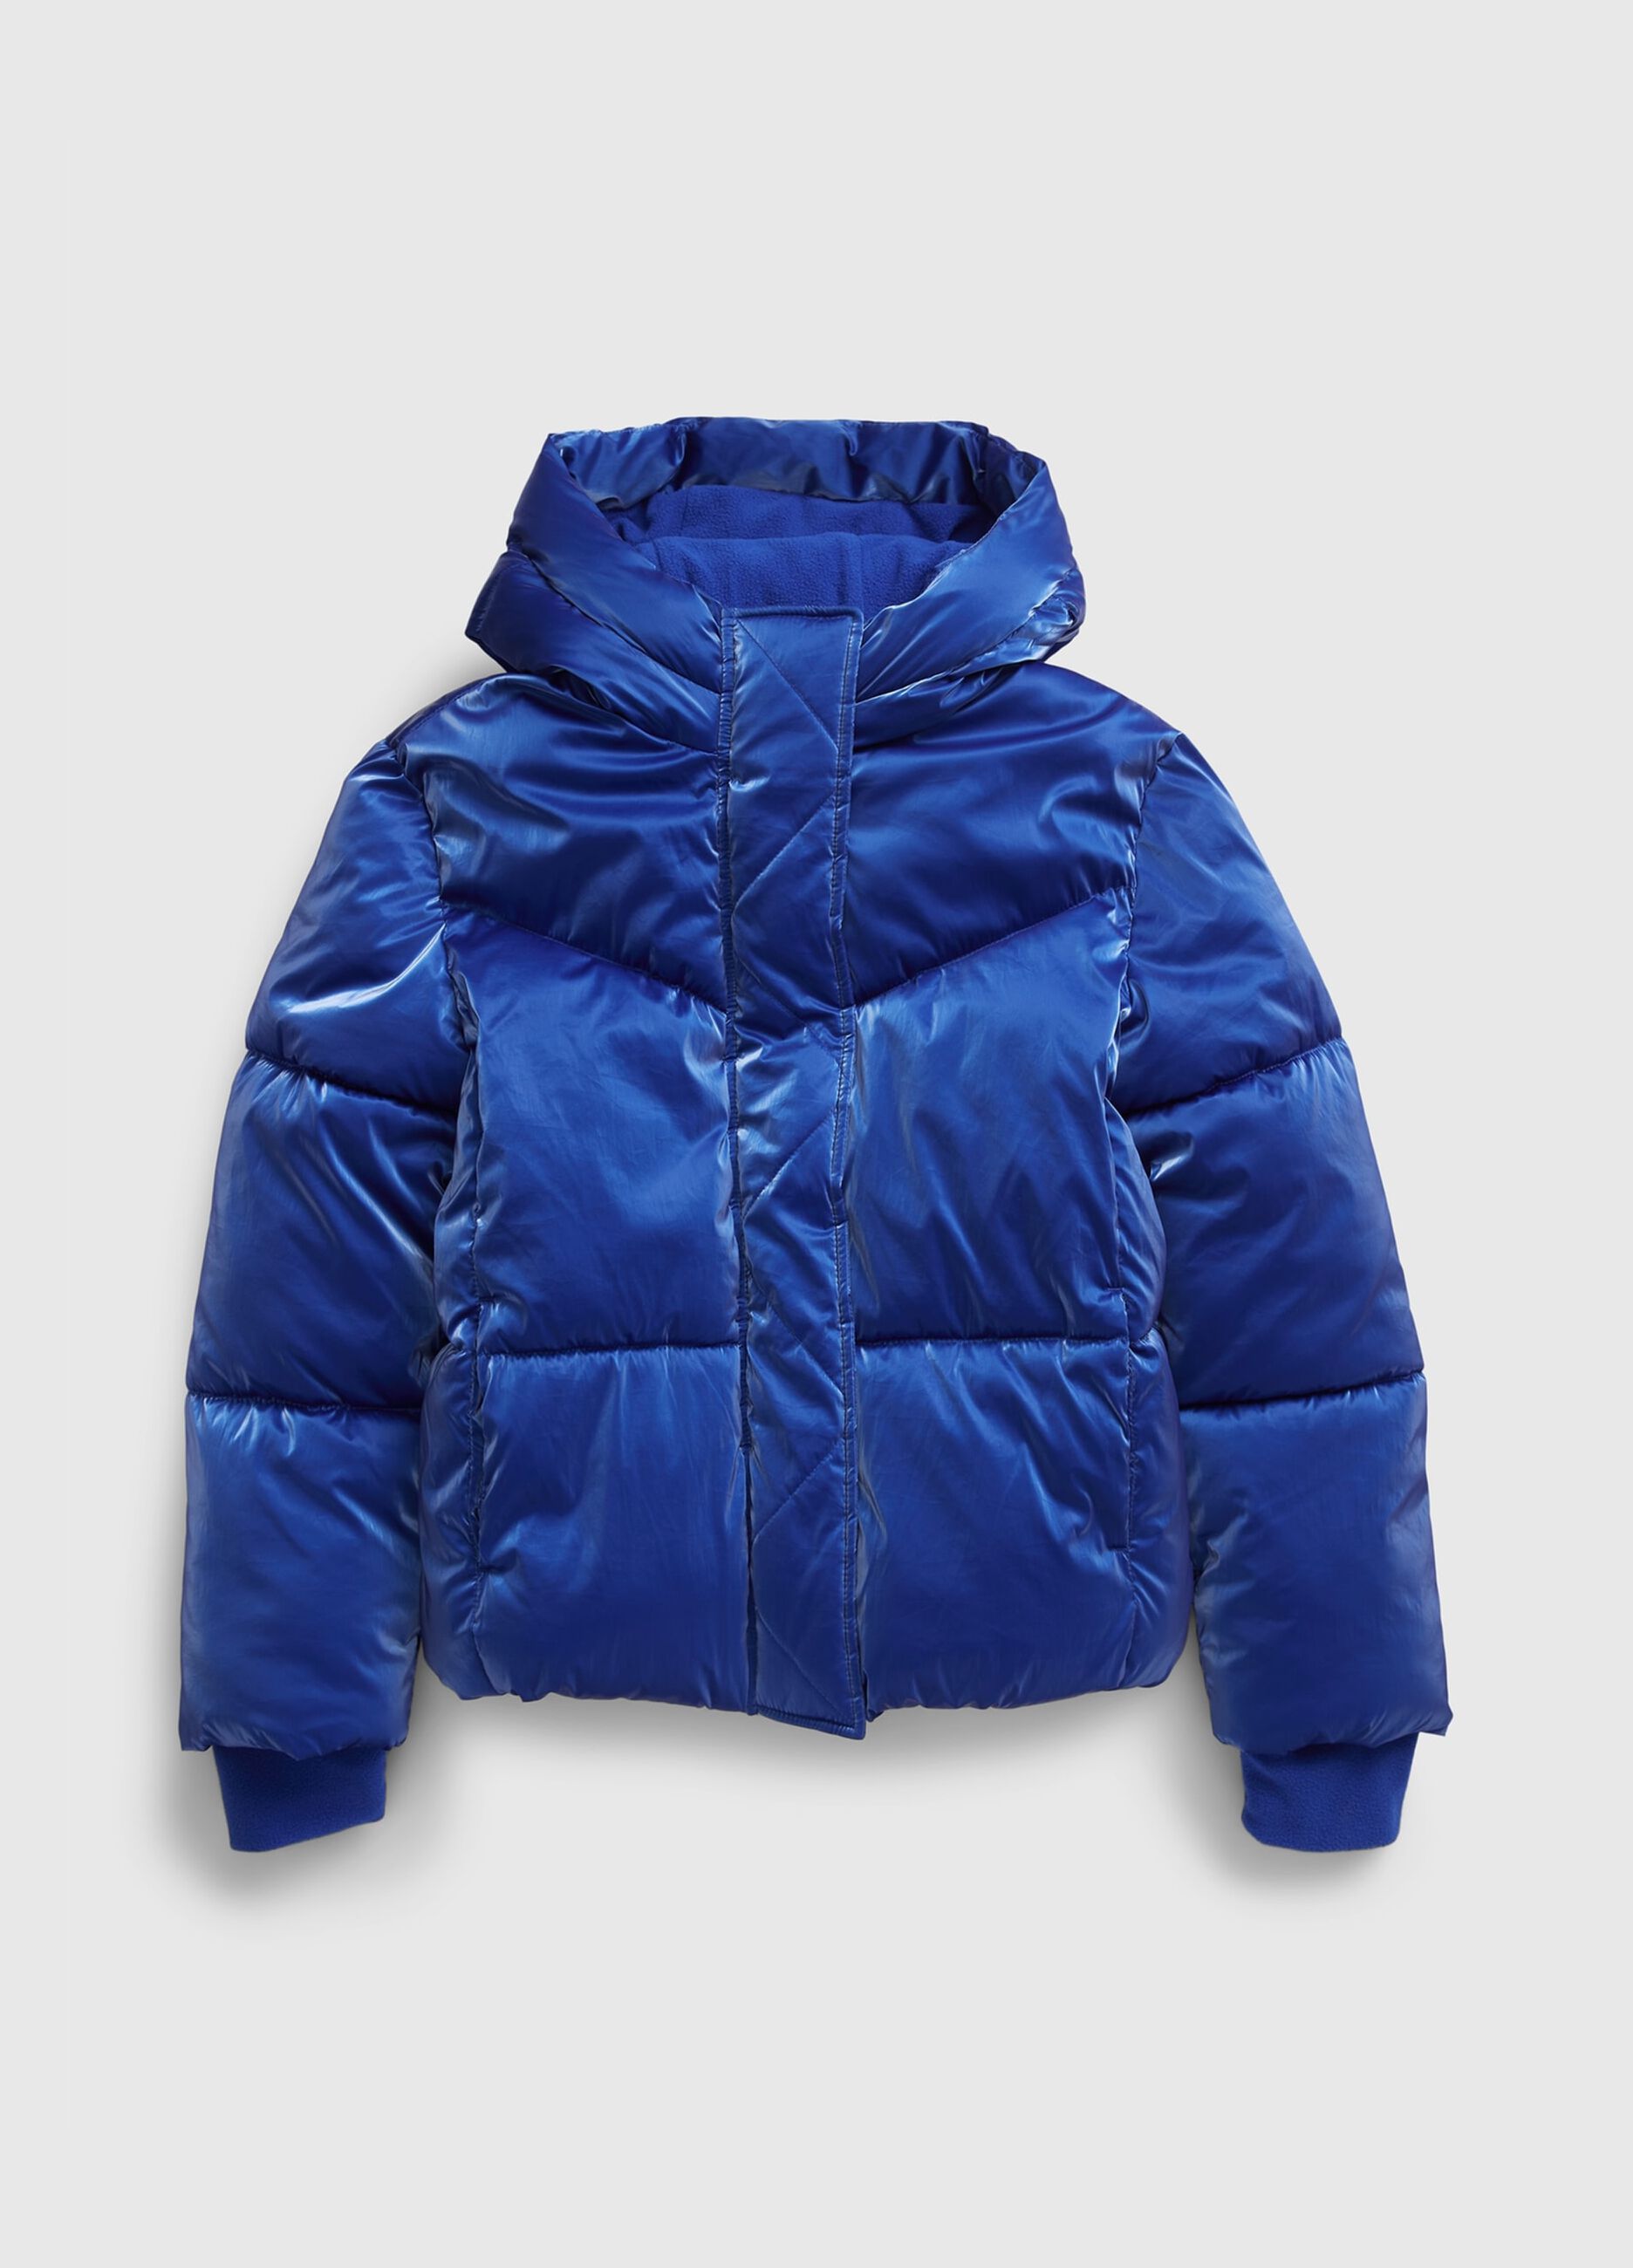 Full-zip quilted and padded jacket with shiny effect